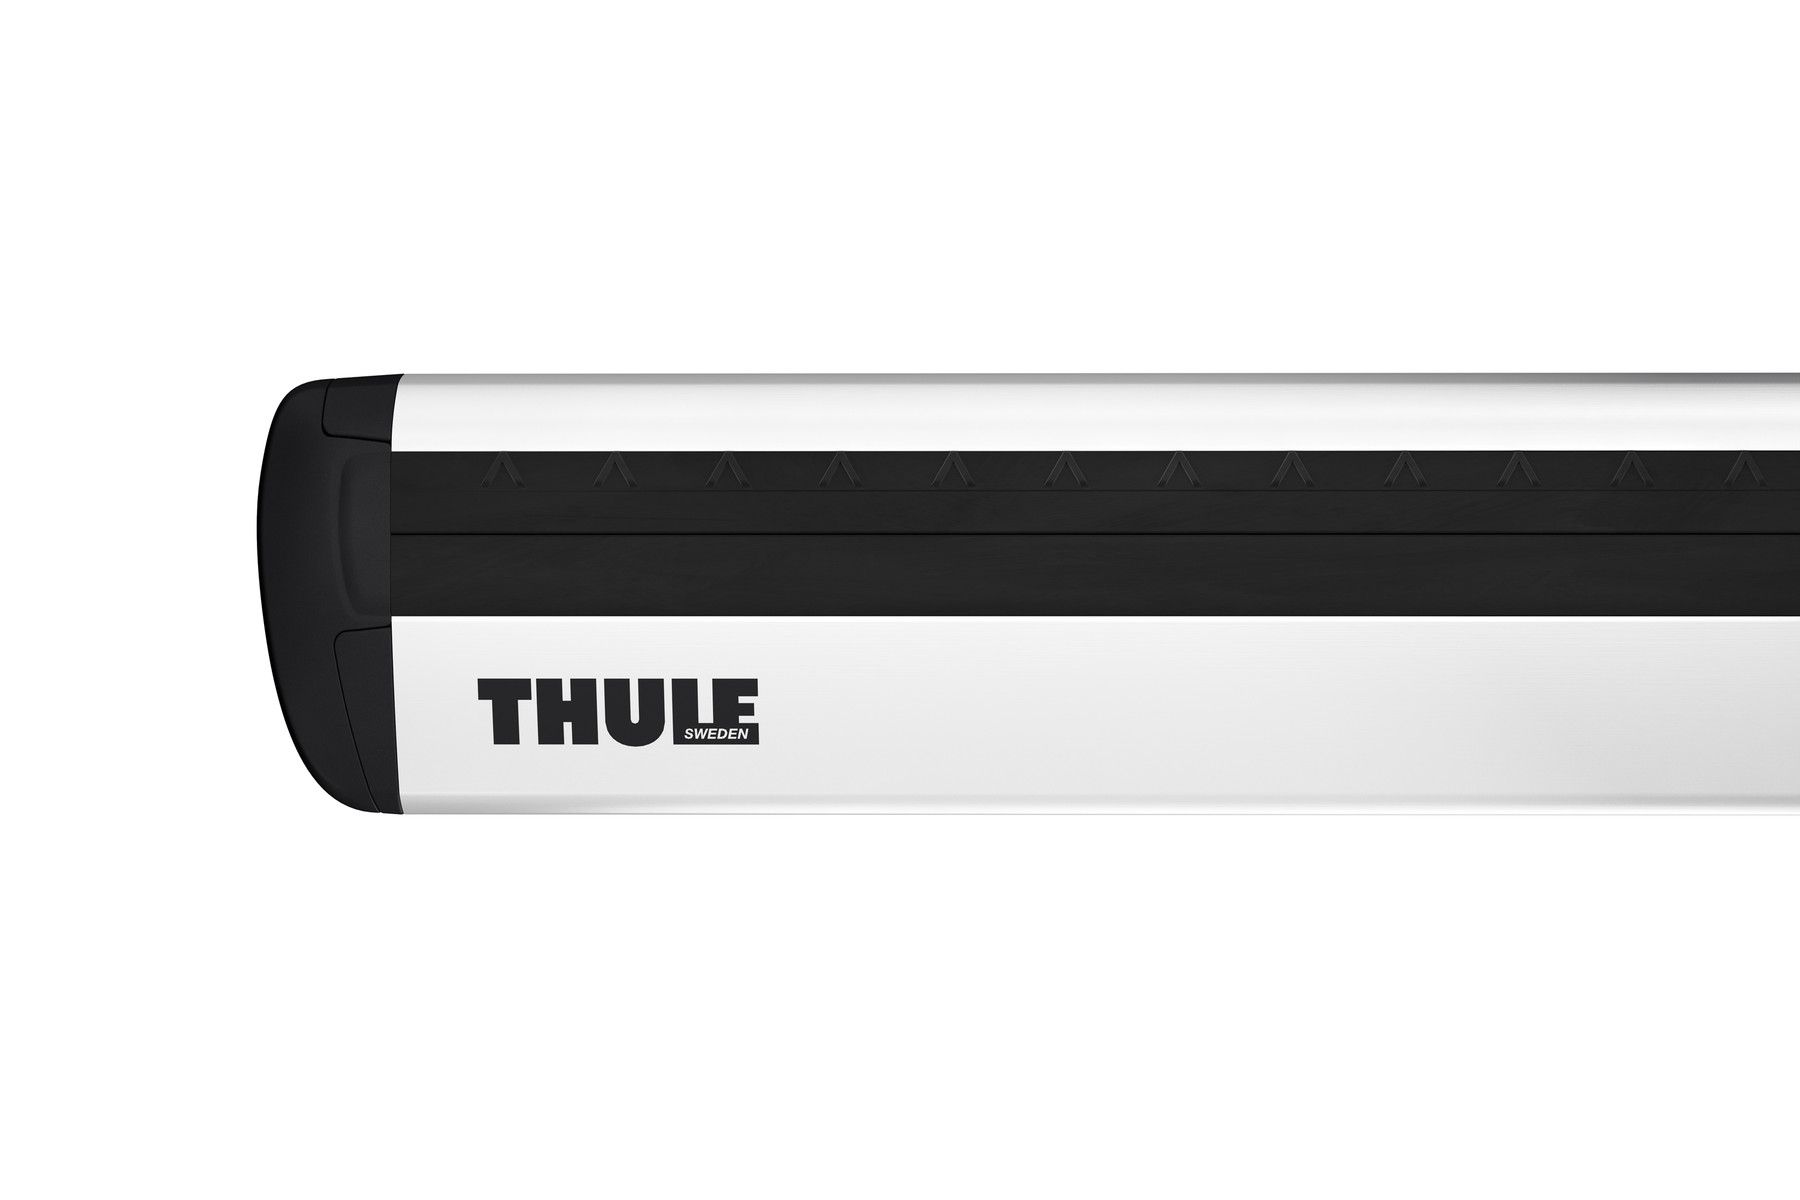 Thule WingBar Evo Silver 2 Bar Roof Rack for Subaru Forester SH 5dr SUV with Raised Roof Rail (2008 to 2012) - Raised Rail Mount